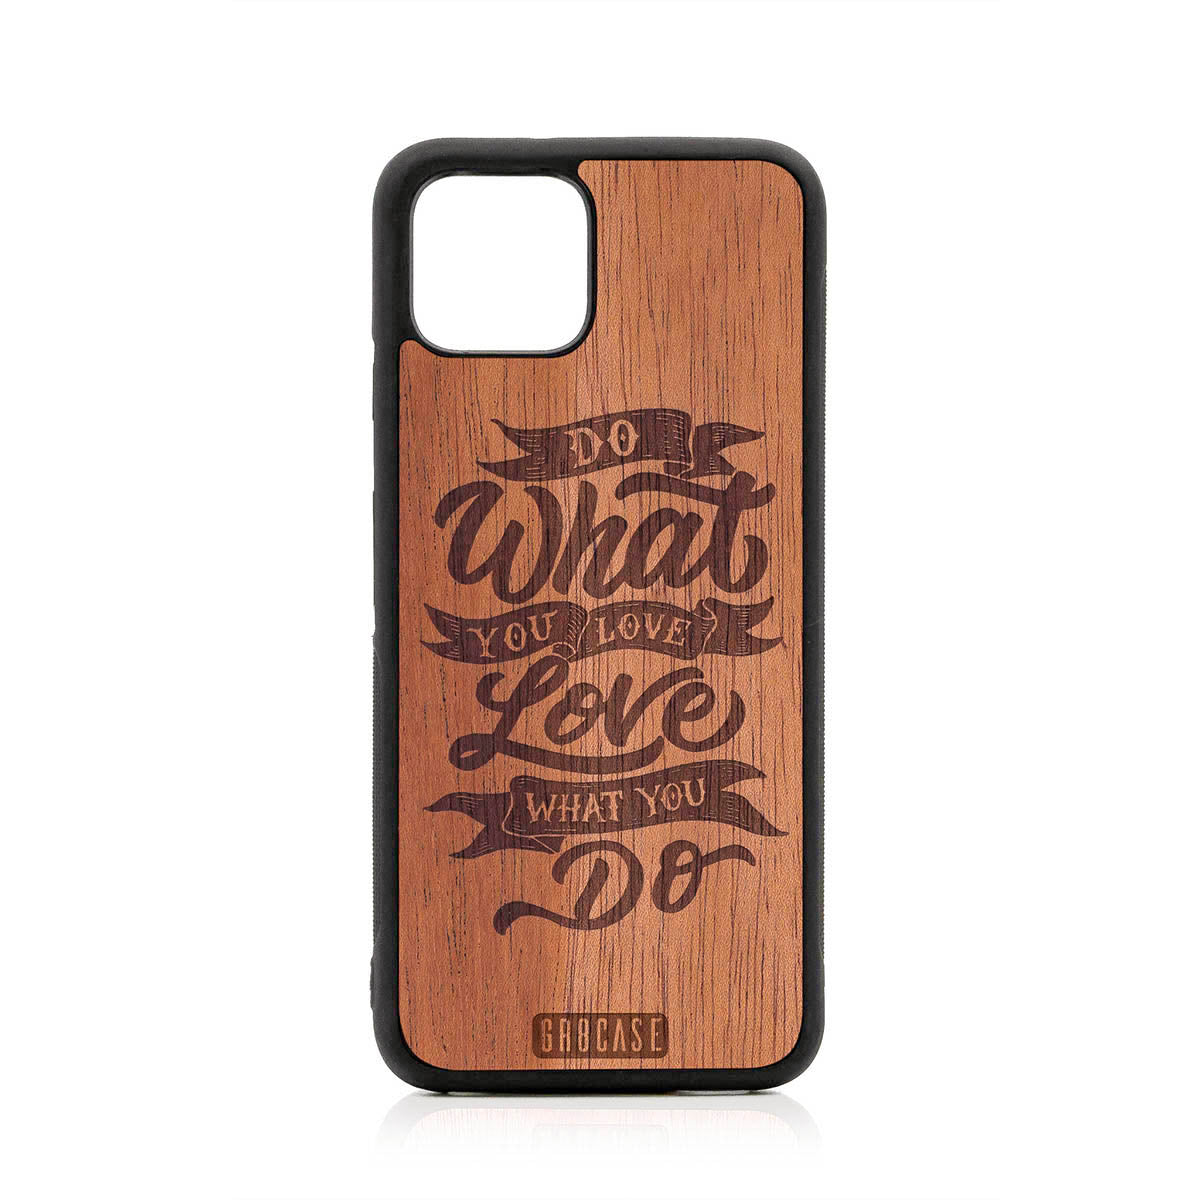 Do What You Love Love What You Do Design Wood Case For Google Pixel 4 by GR8CASE